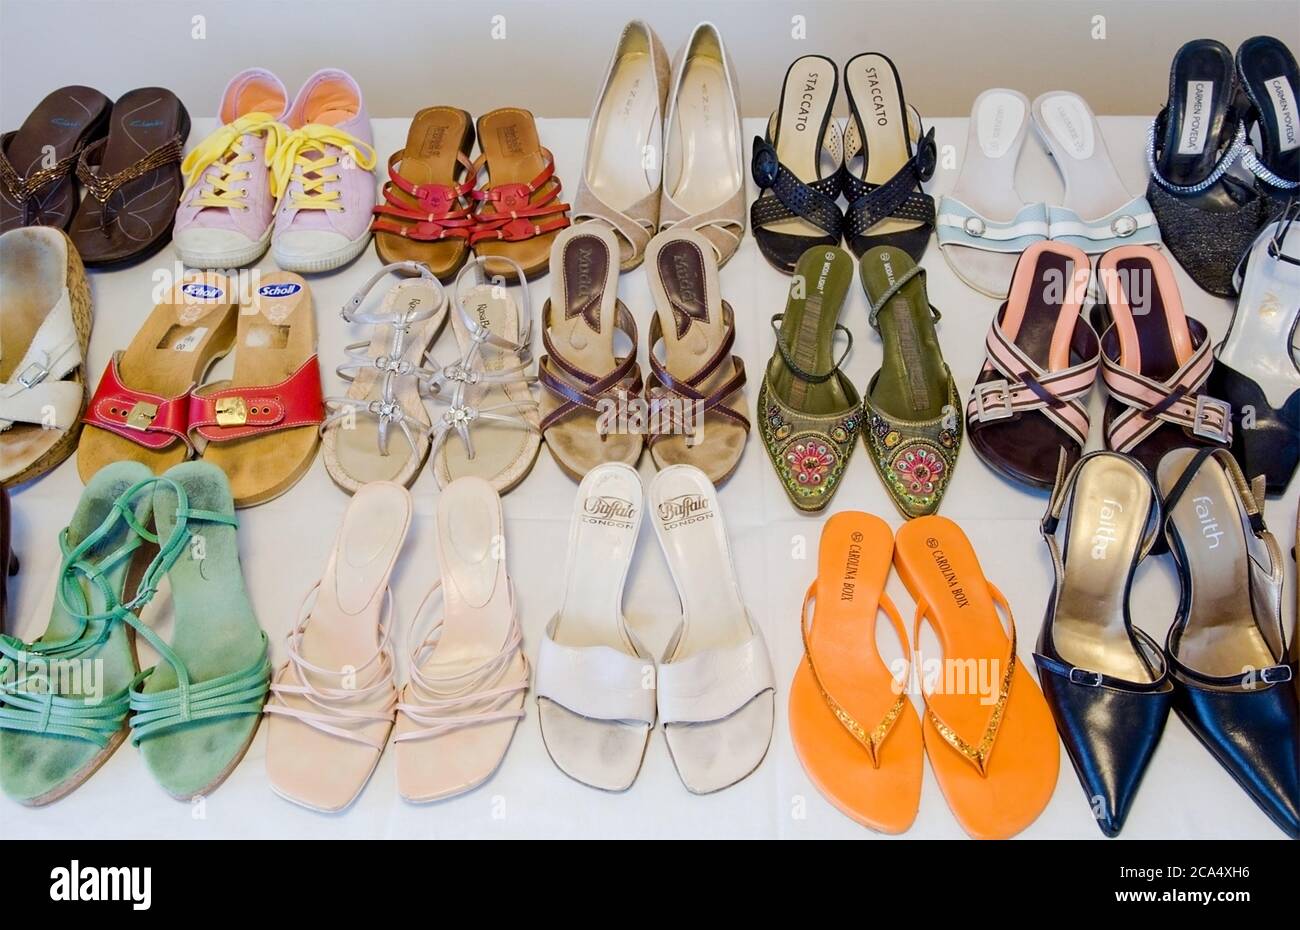 Rows of women's shoes Stock Photo - Alamy